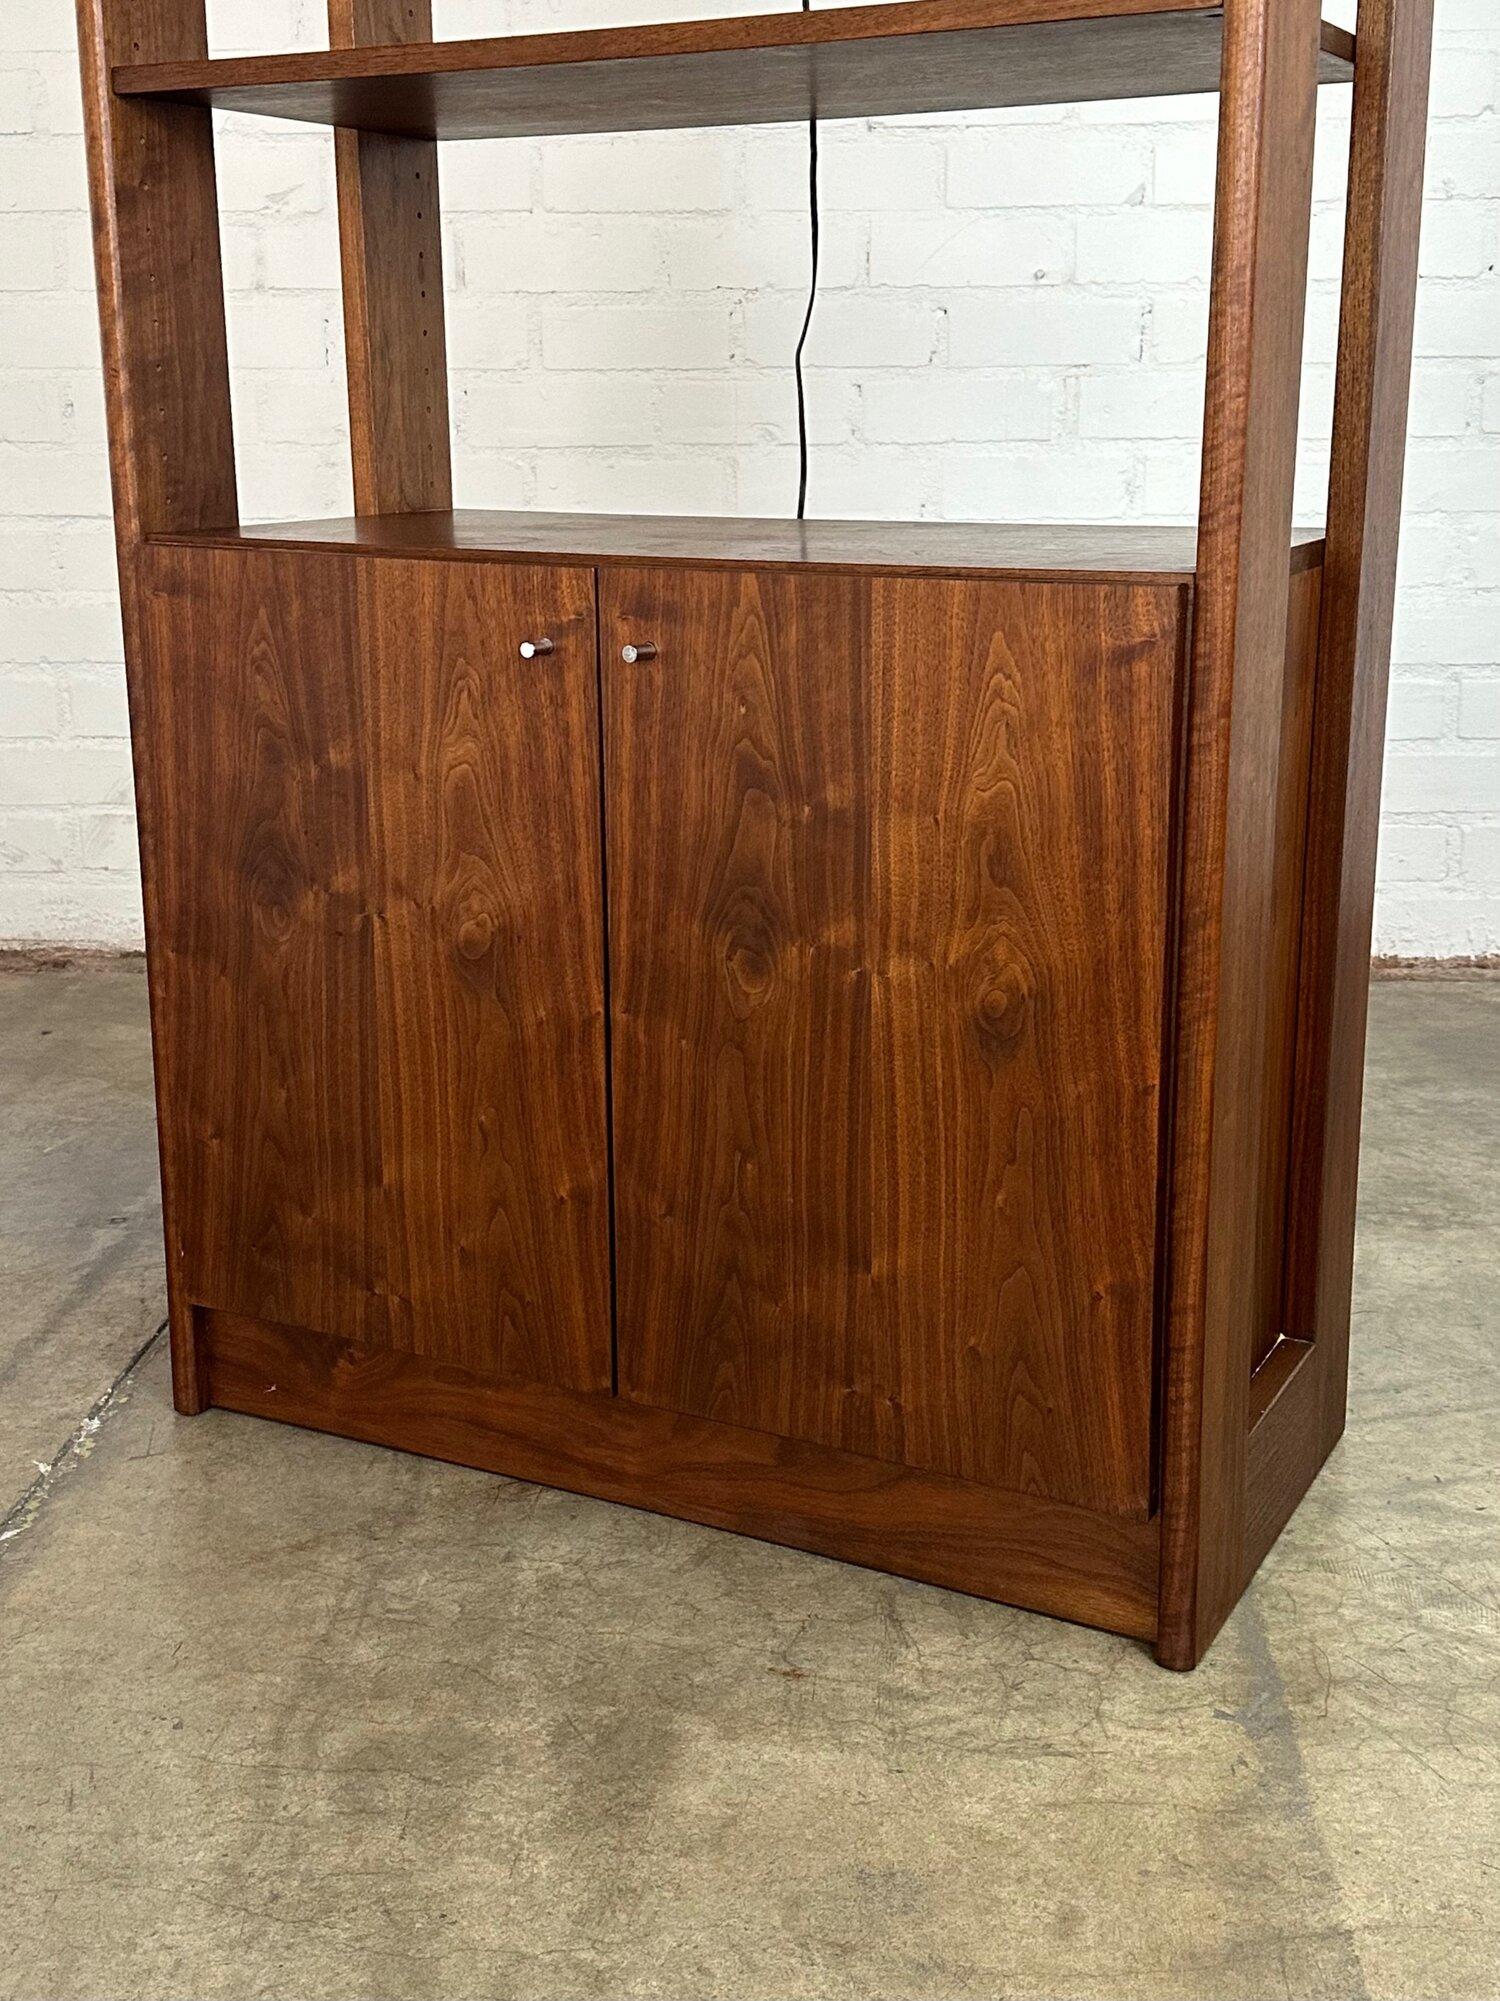 Mid-20th Century Barzilay style free standing bookcase #1 For Sale